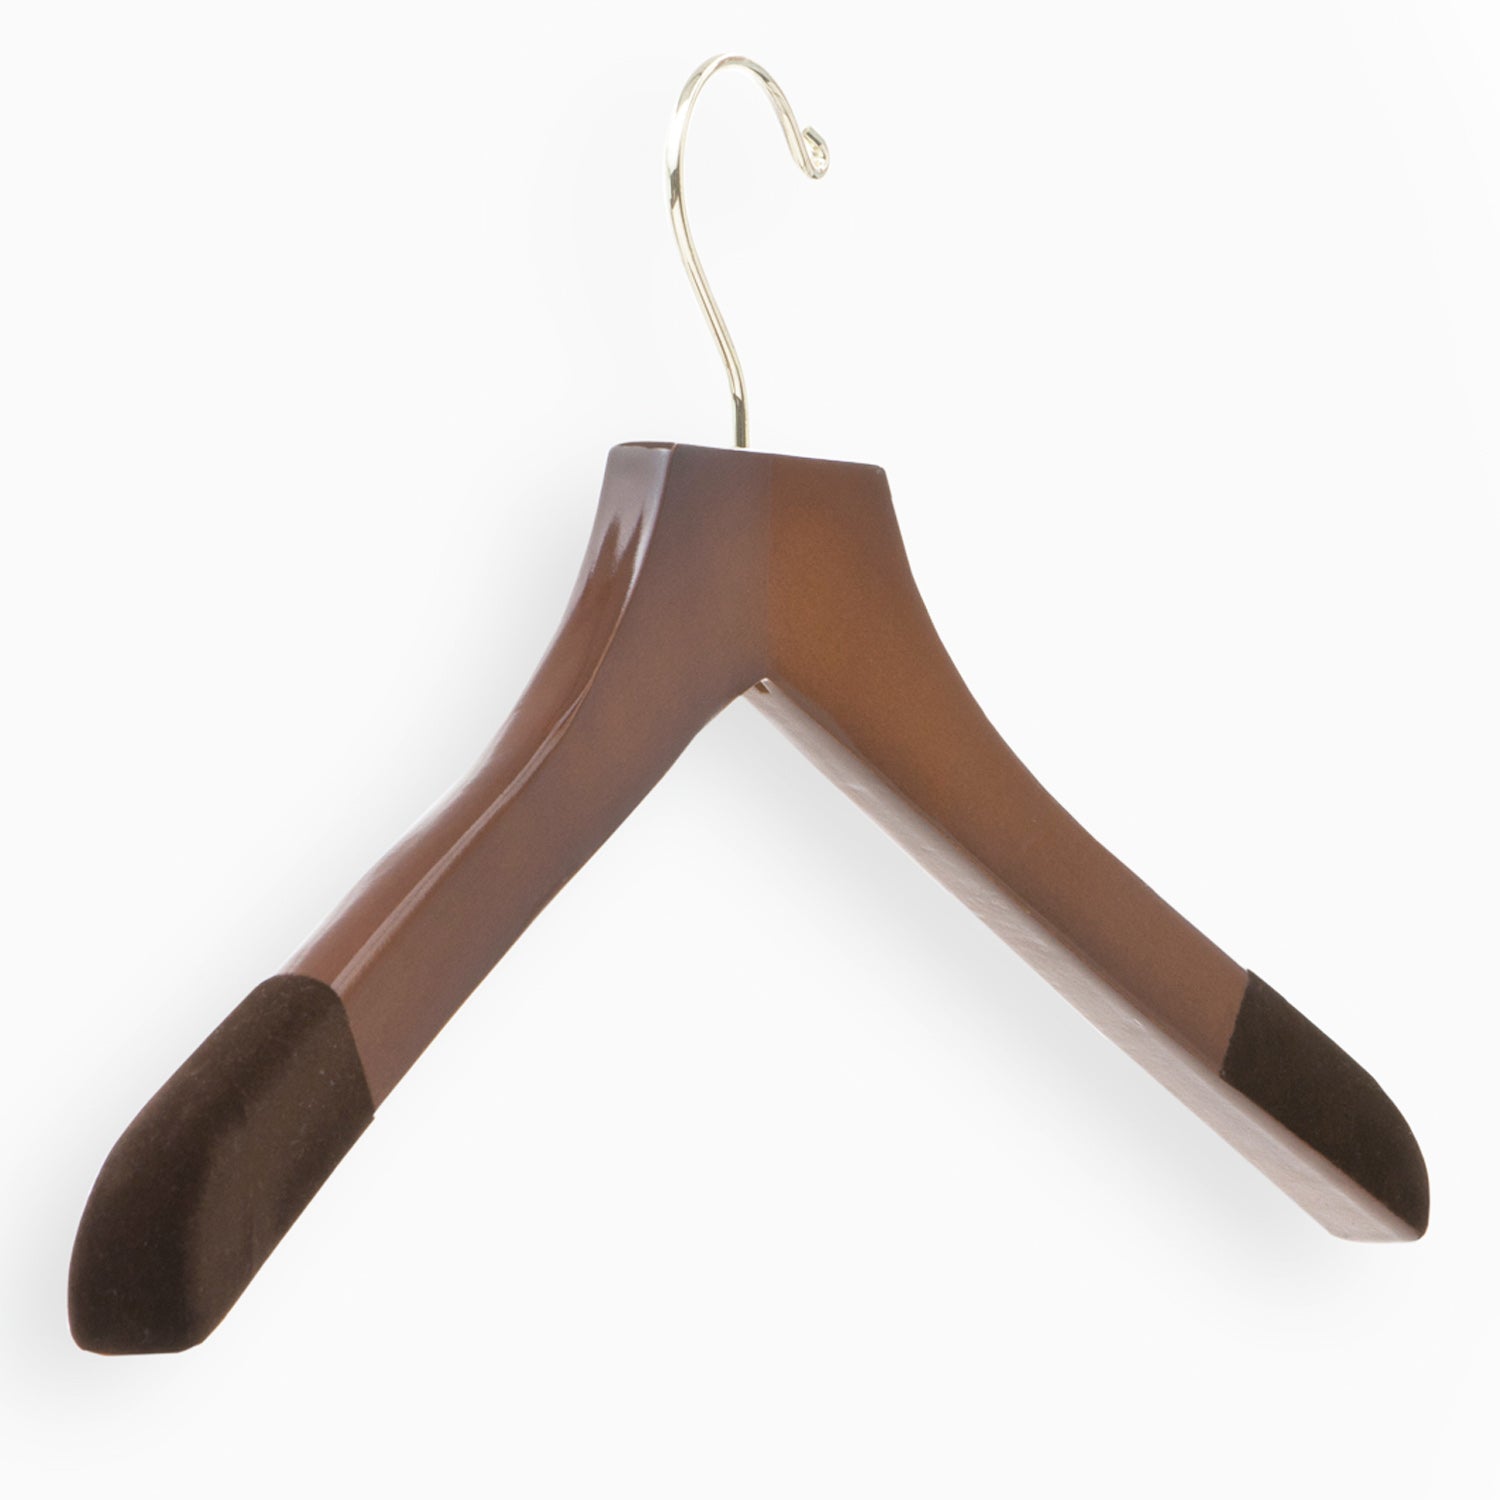 Wooden hangers are best for suits and jackets, knits and sweaters, robes,  and evening wear.